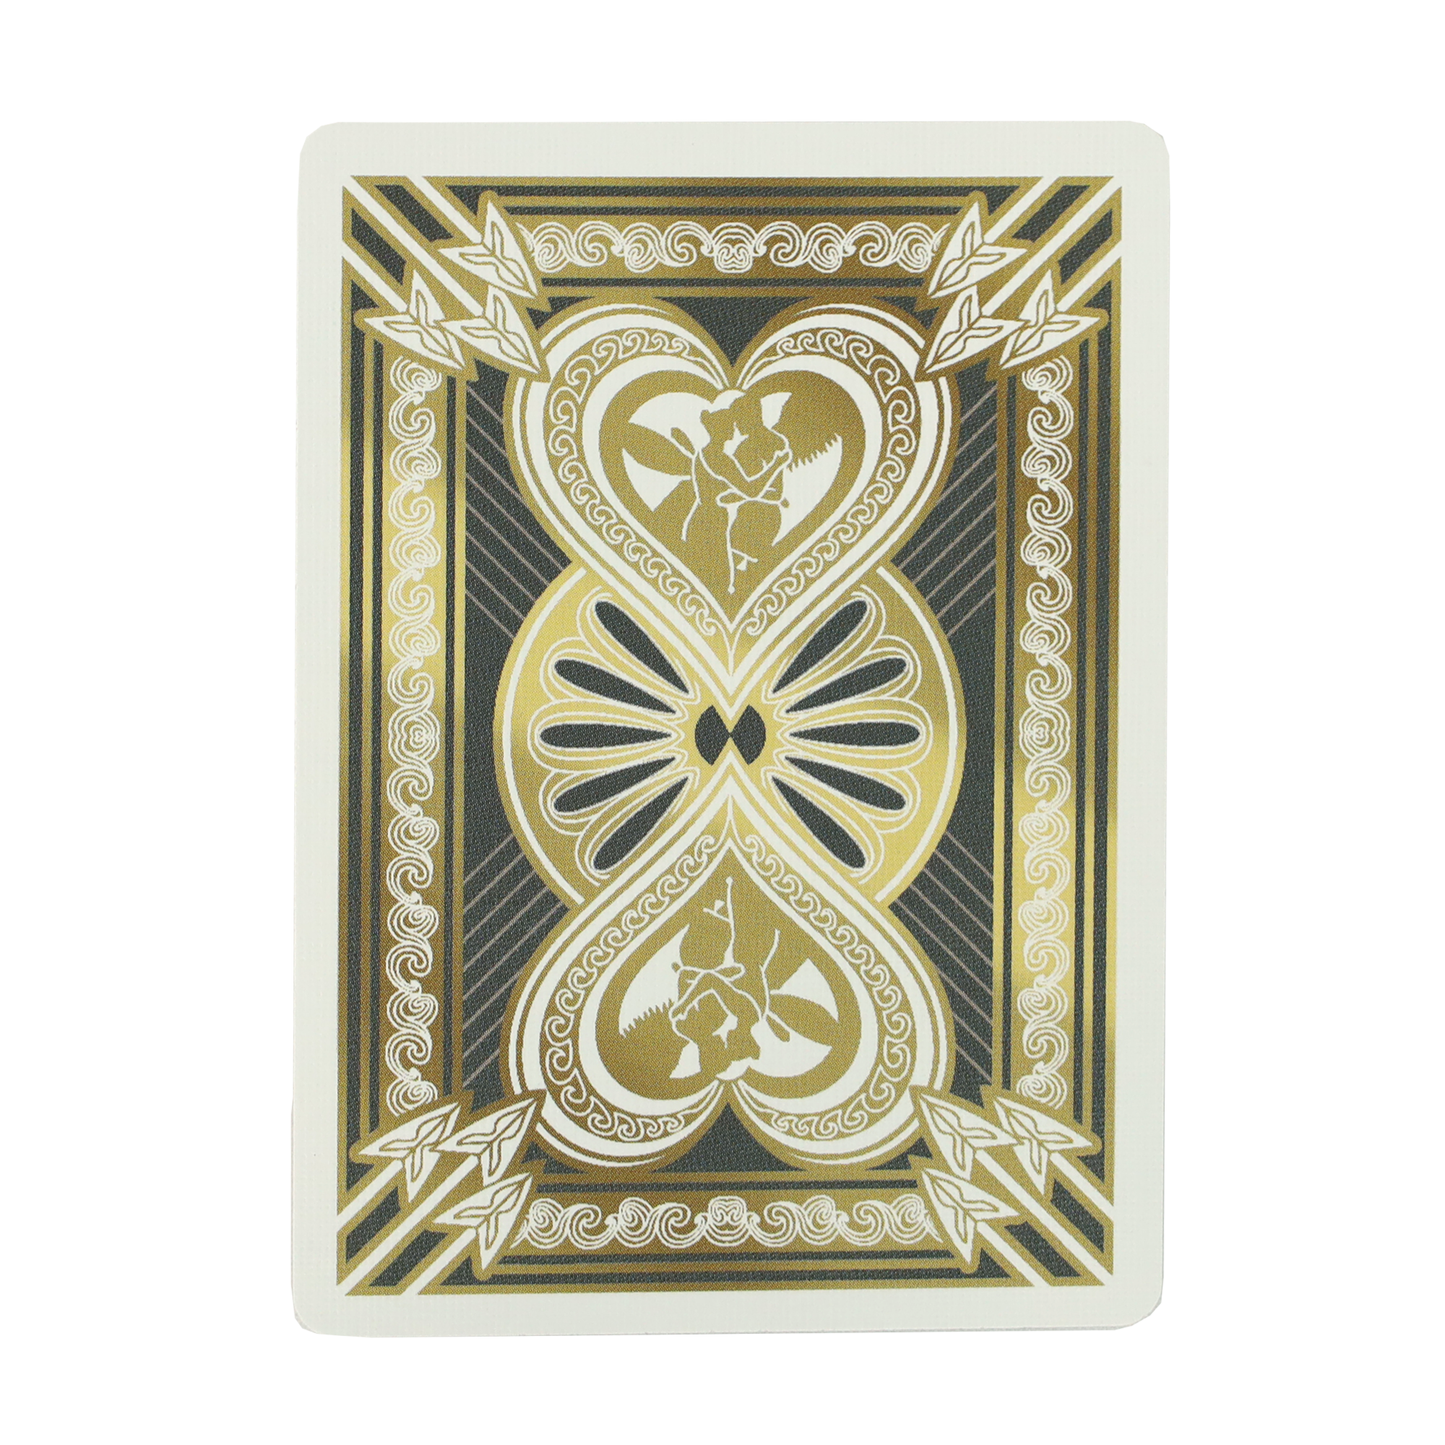 Cupid and Psyche Bicycle Playing Cards